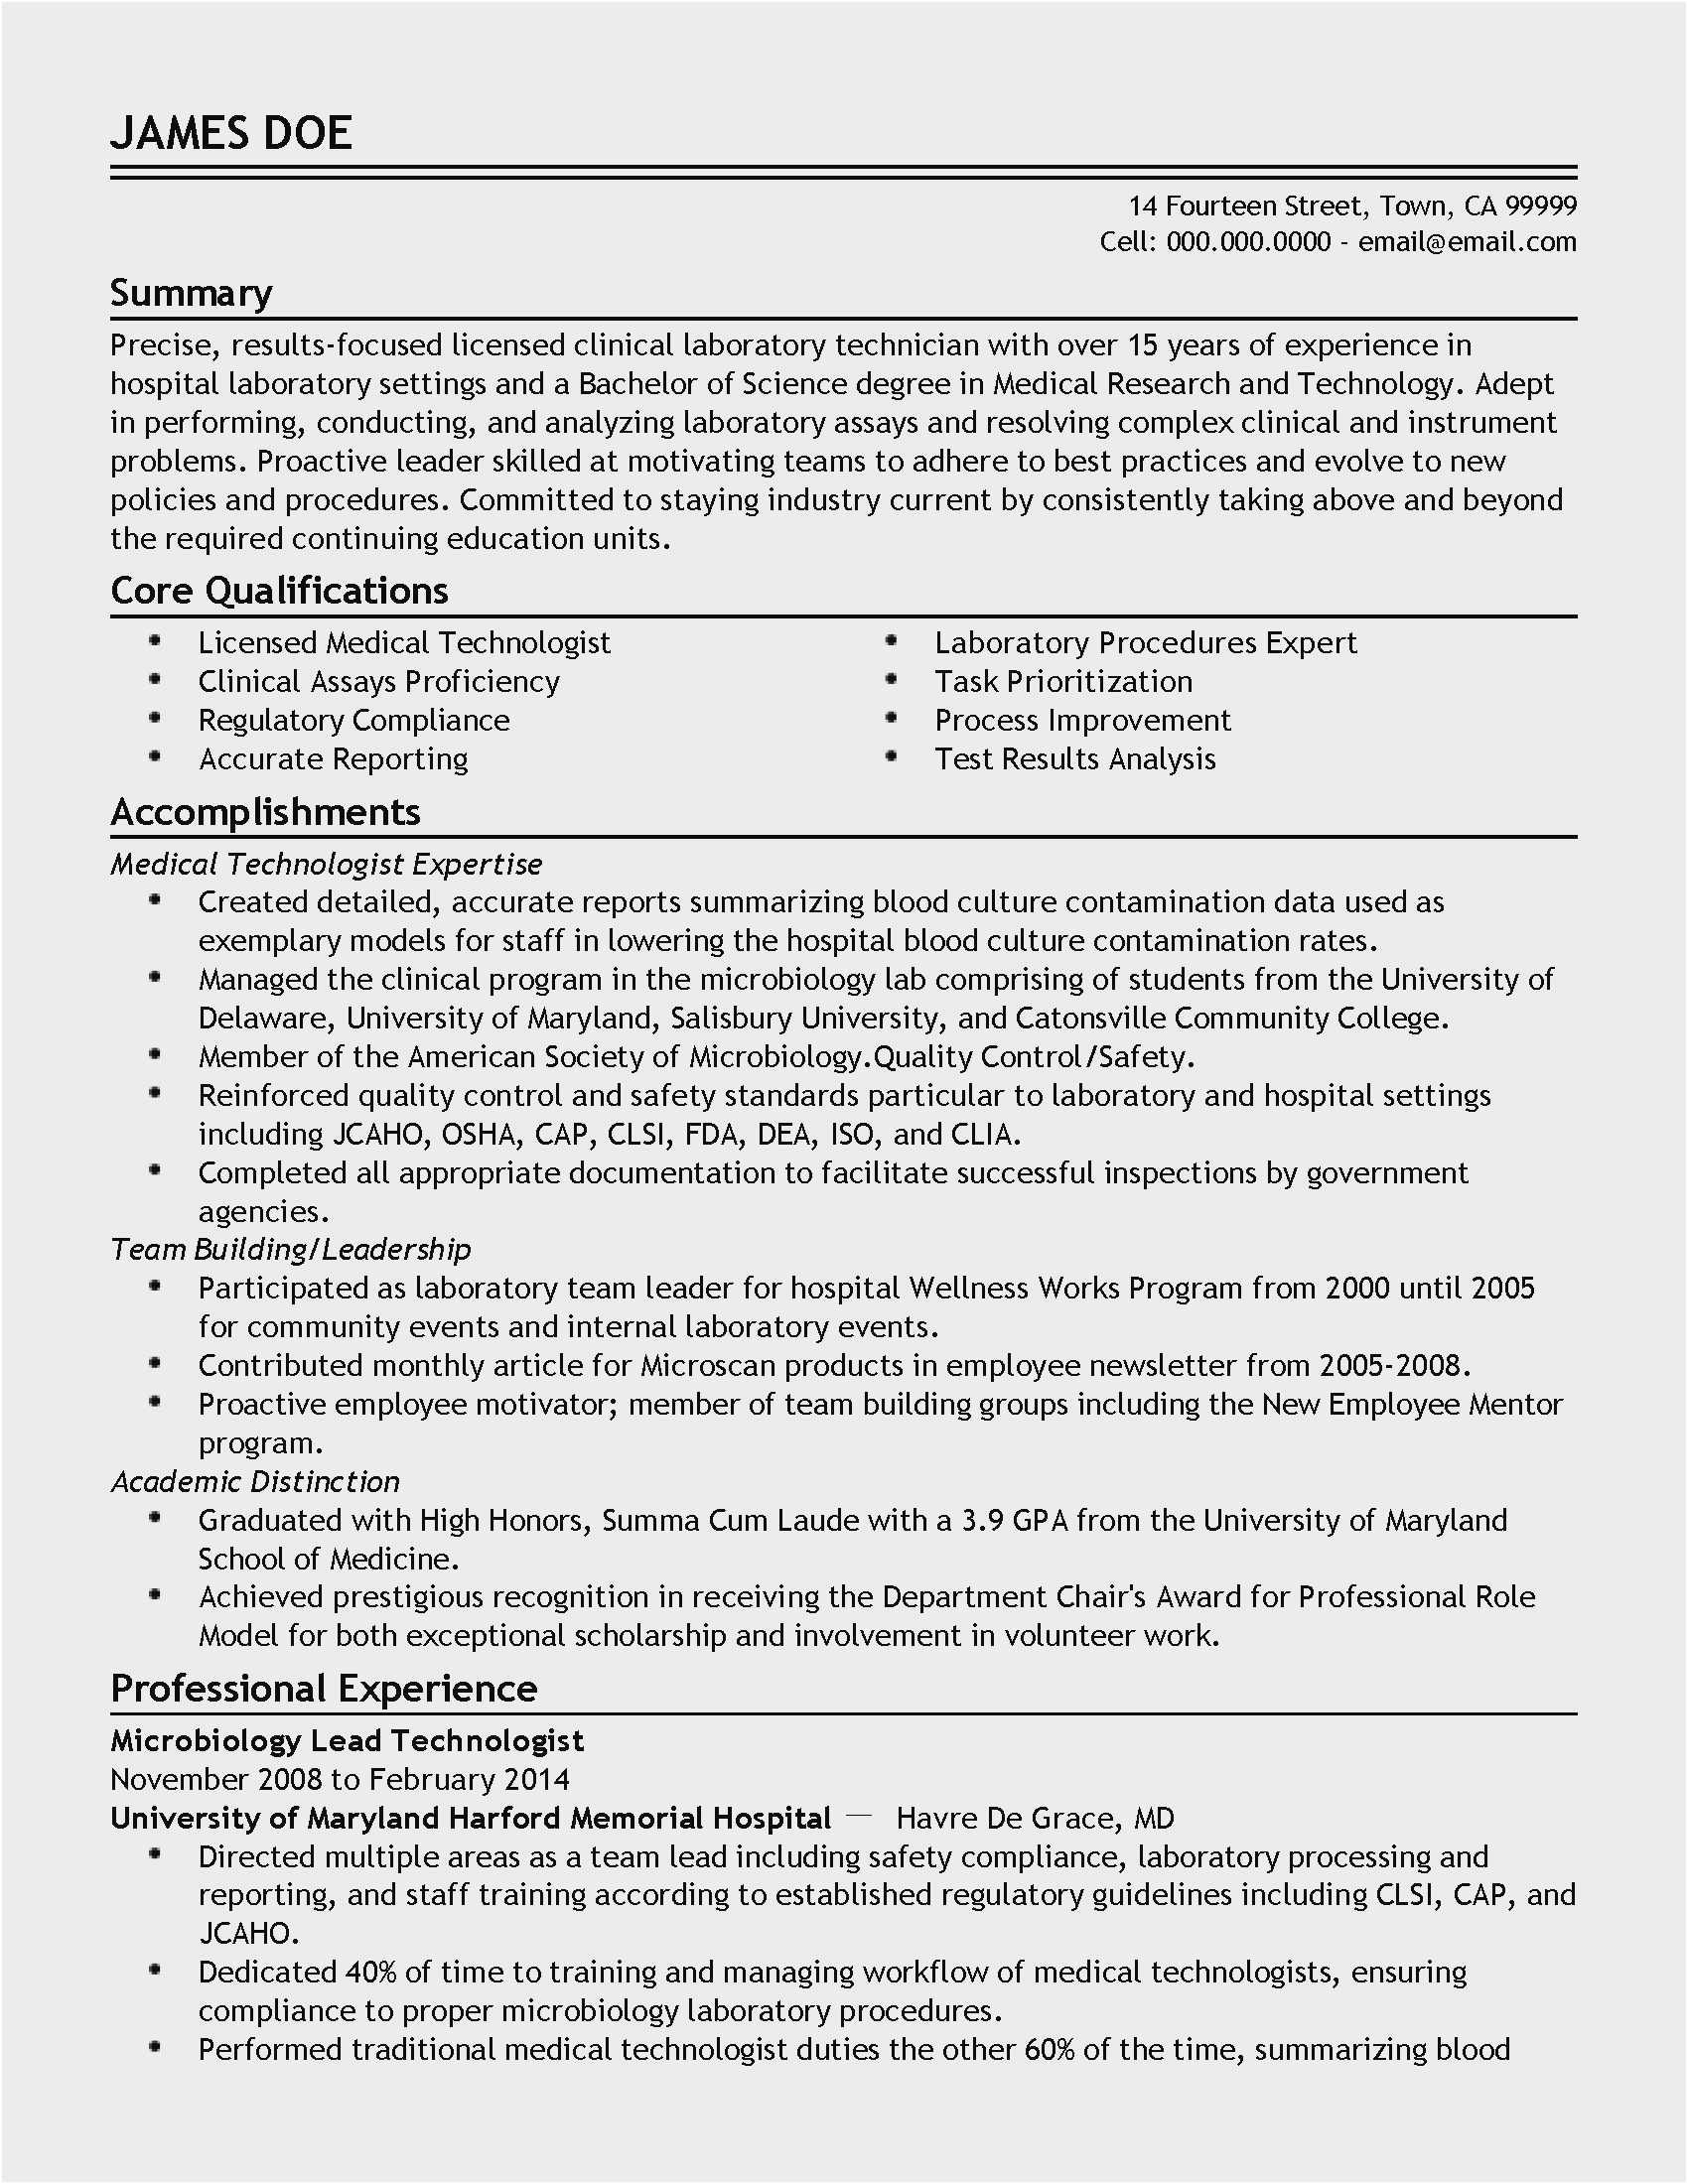 Sample Resume for Lab Technician Entry Level Free Collection 20 Medical Laboratory Technician Resume